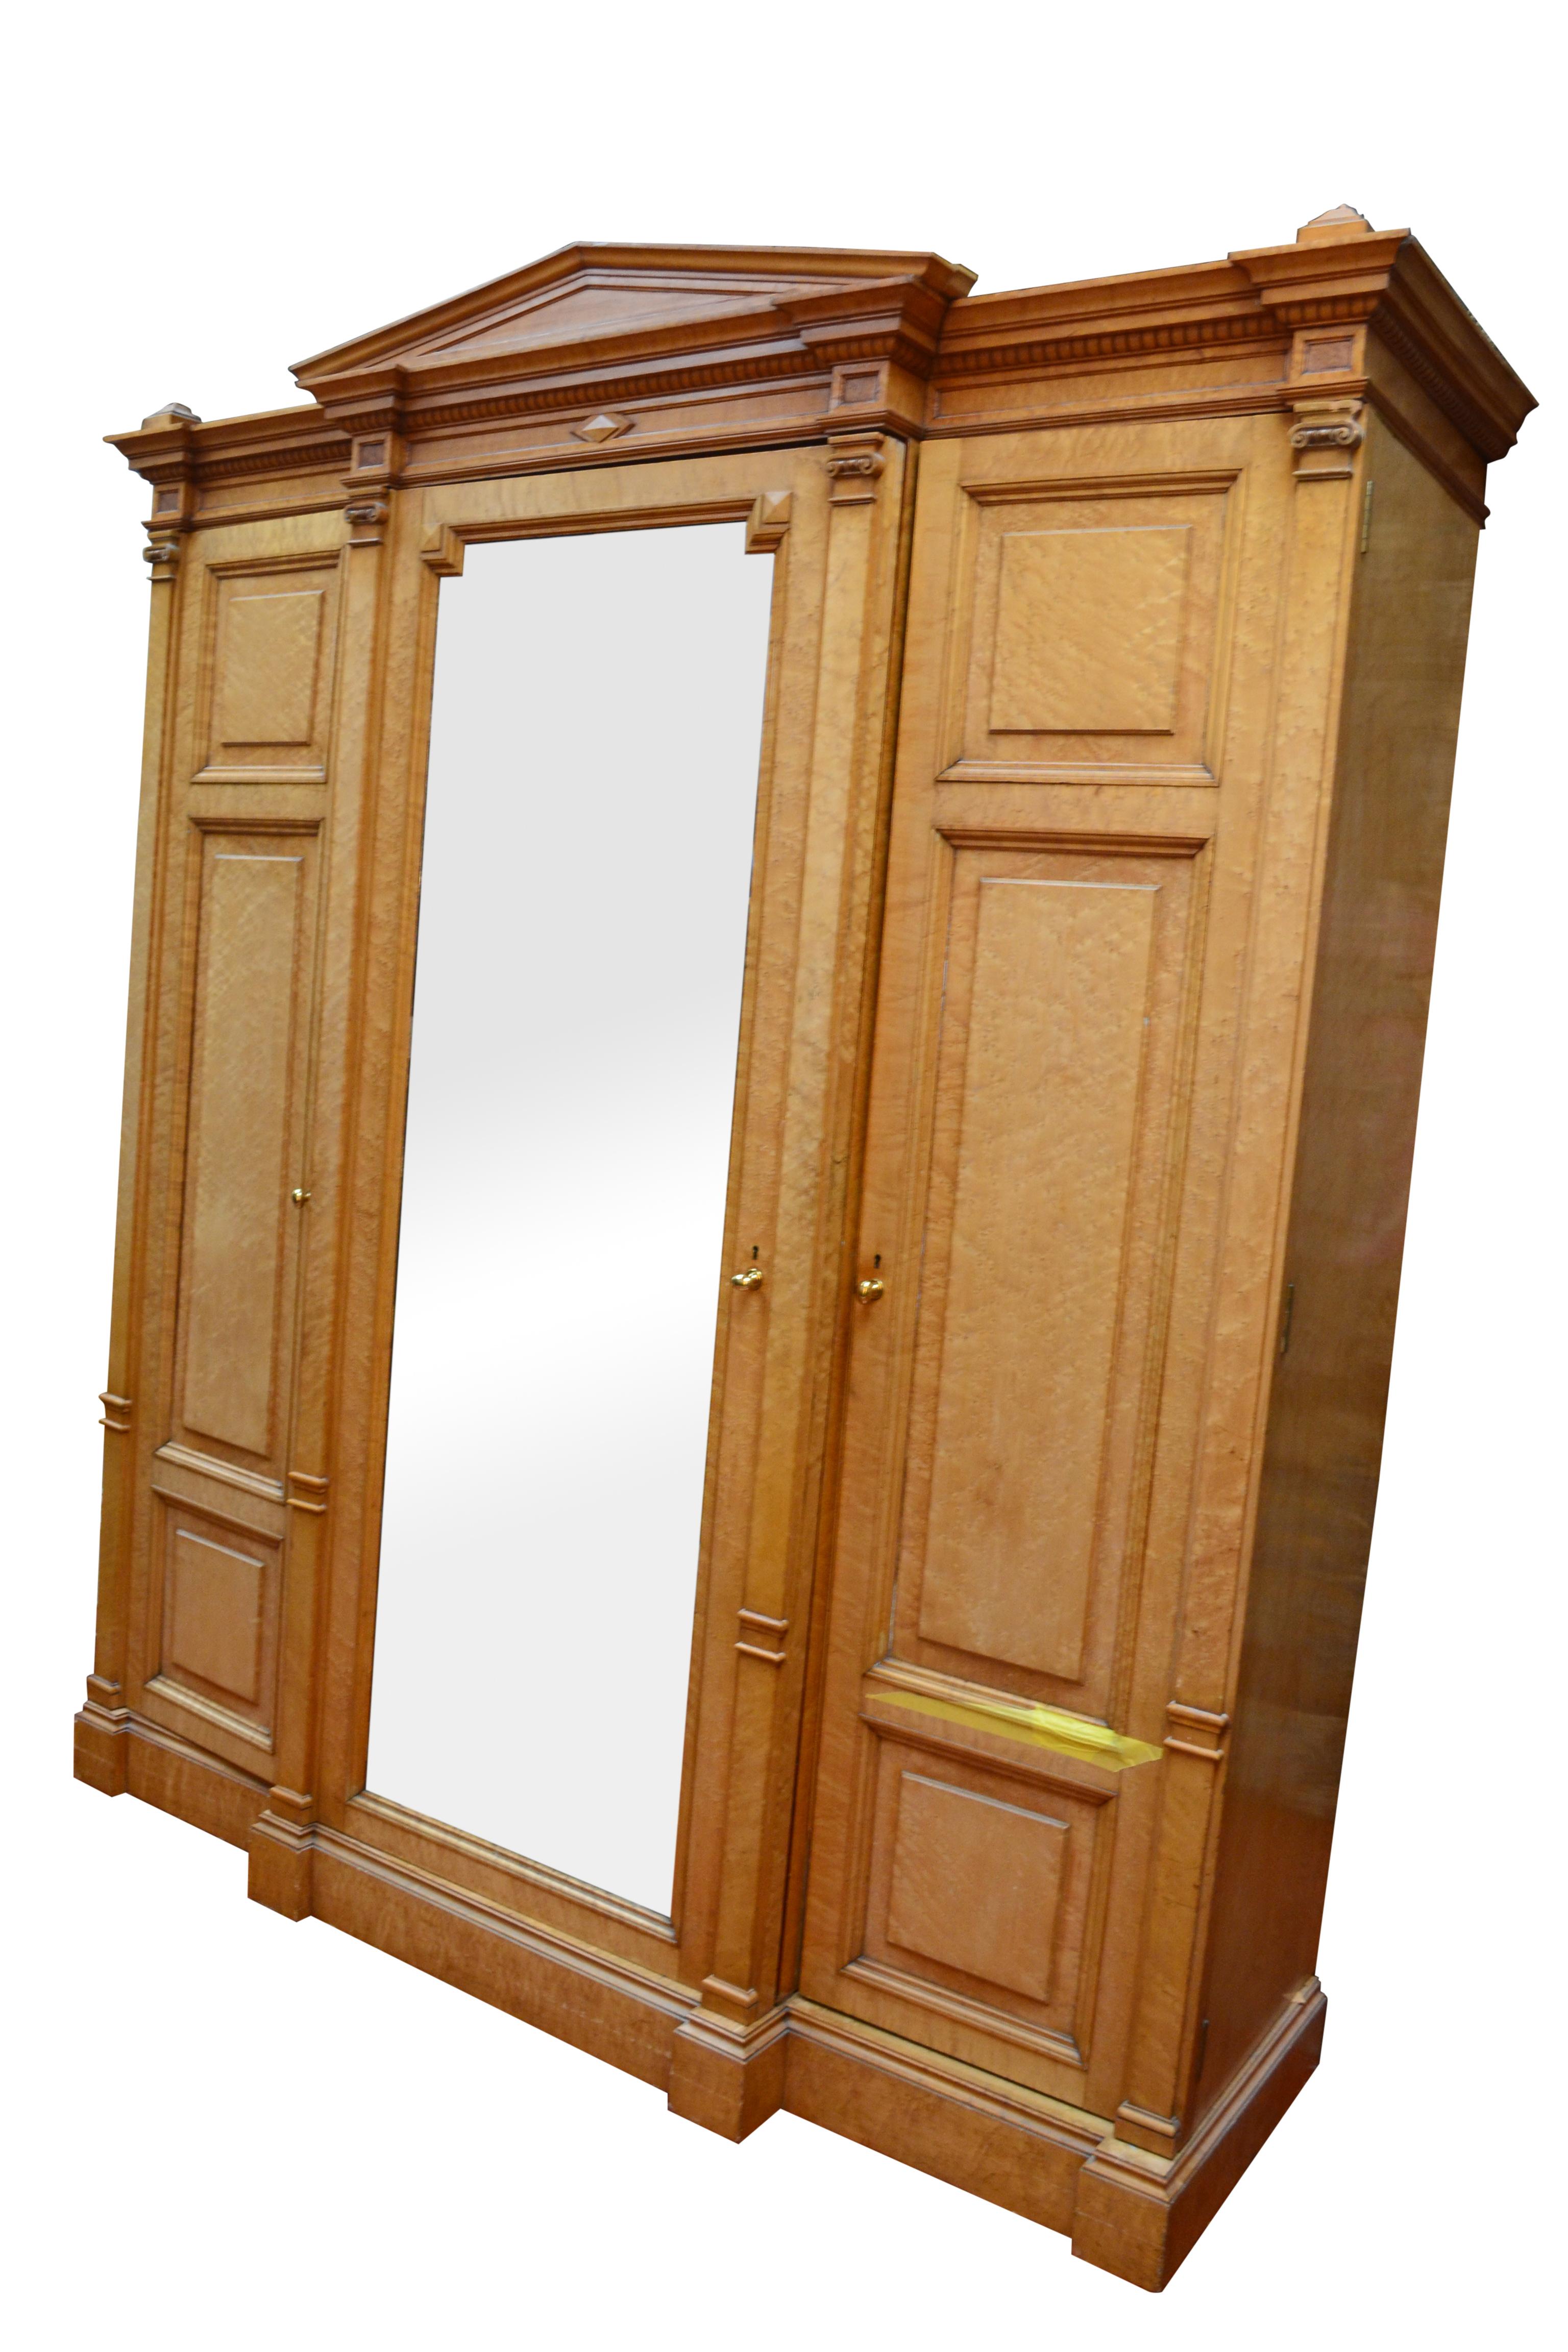 19th Century American Neoclassical Style Bird's-Eye Maple Armoire For Sale 2